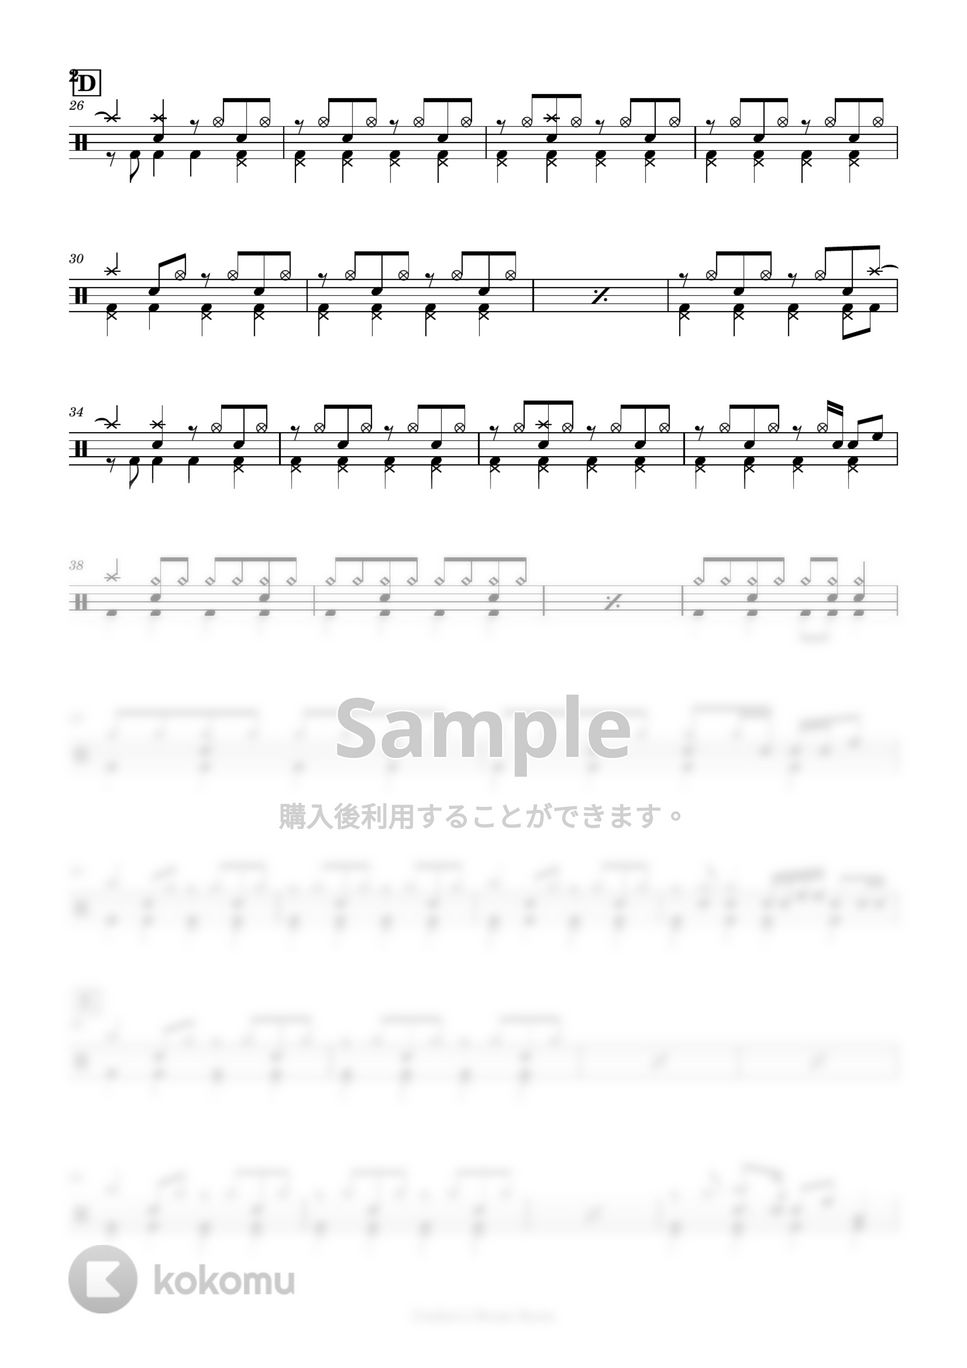 Official髭男dism - ESCAPADE by Cookie's Drum Score